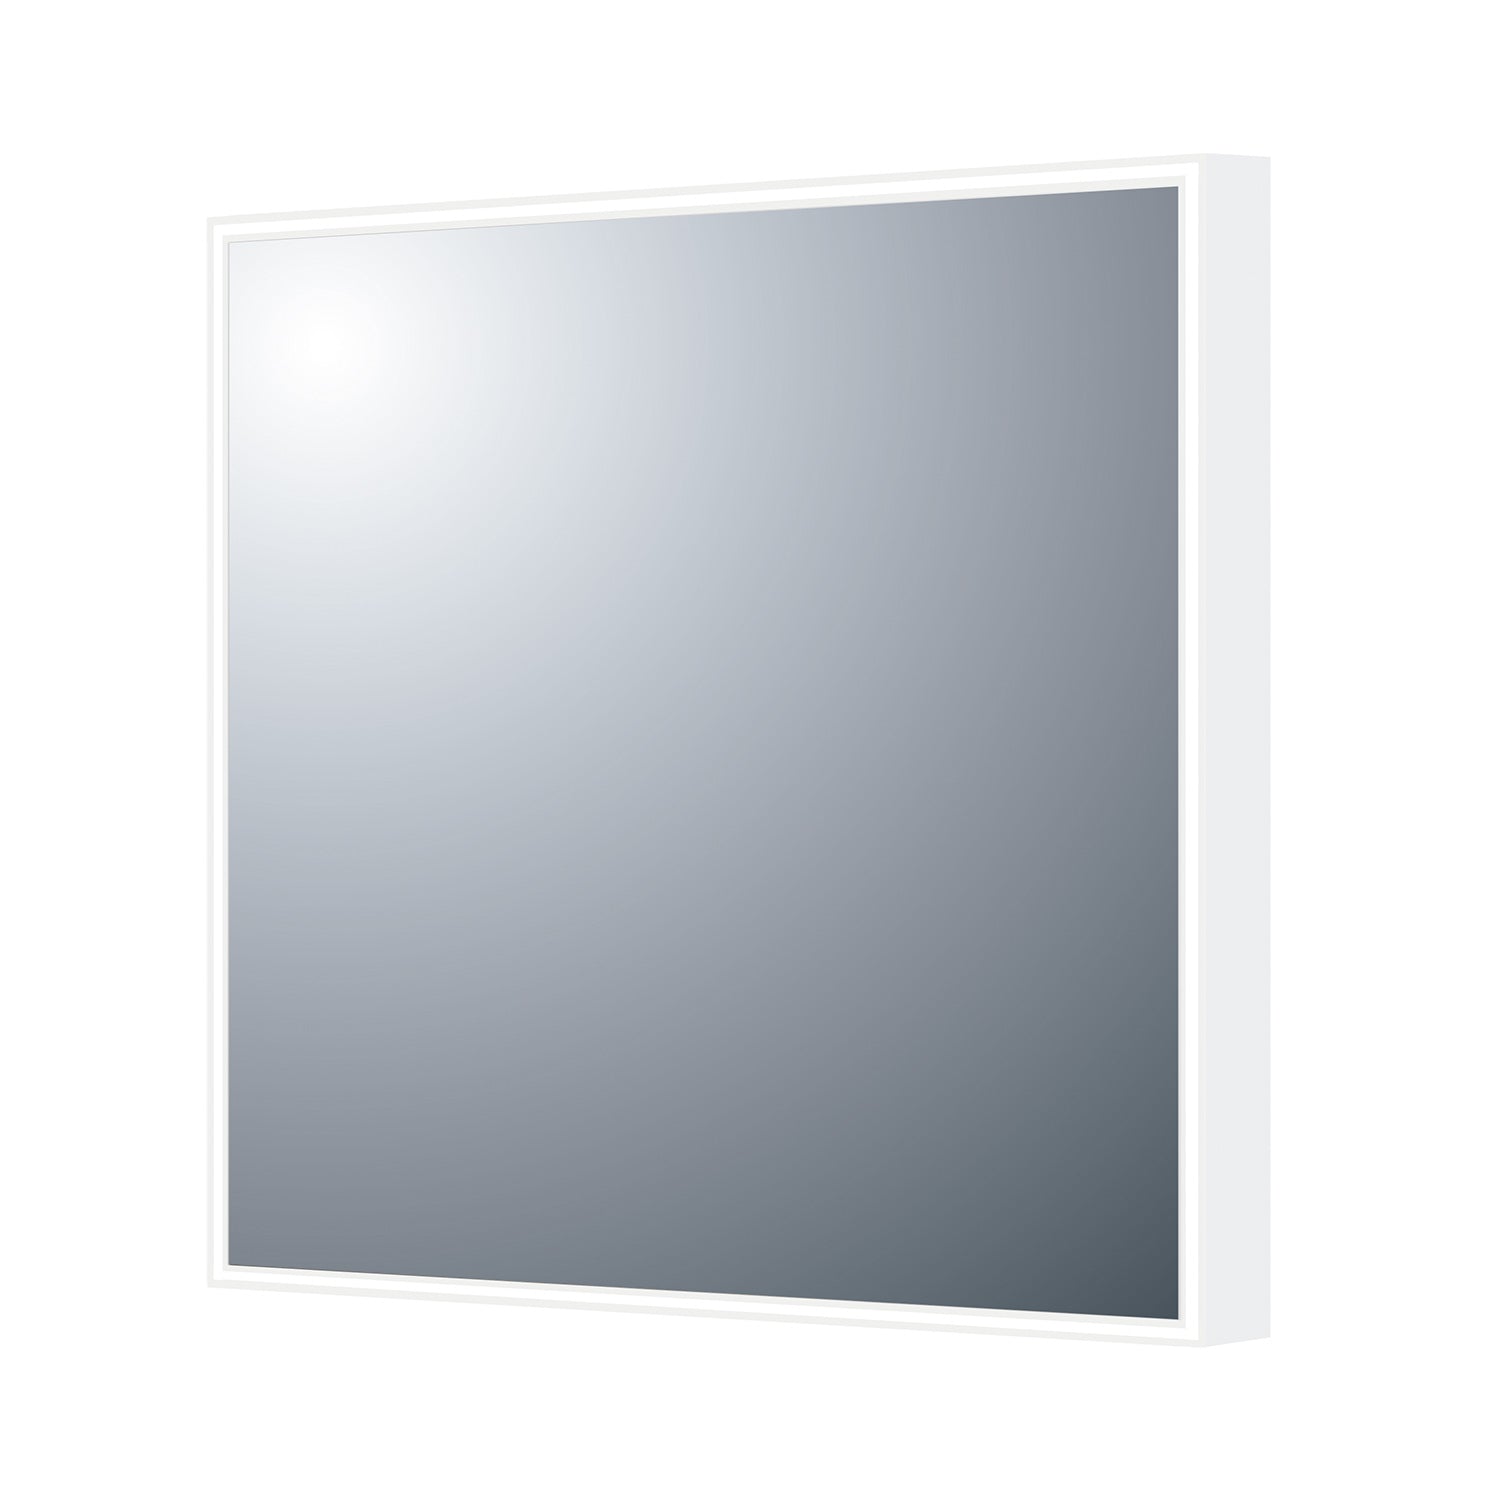 DAX Square LED Light Bathroom Vanity Mirror with Sensor Switch, Wall Mount, Aluminum Frame, 27-9/16 x 27-9/16 x 1-1/2 Inches (DAX-DL03B)